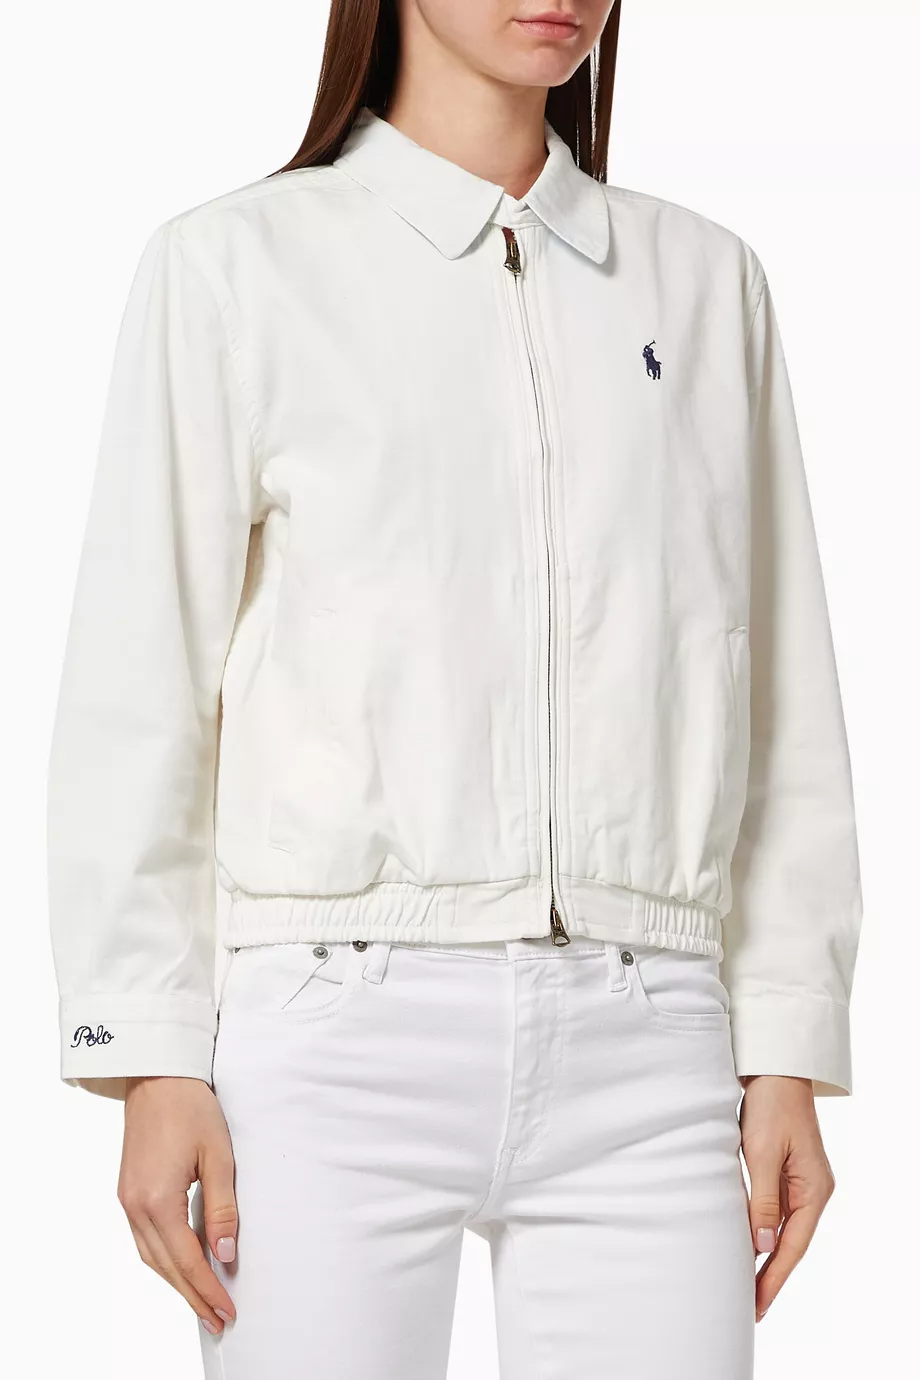 Buy Polo Ralph Lauren Neutral Jacket in Cotton Chino Online for Women